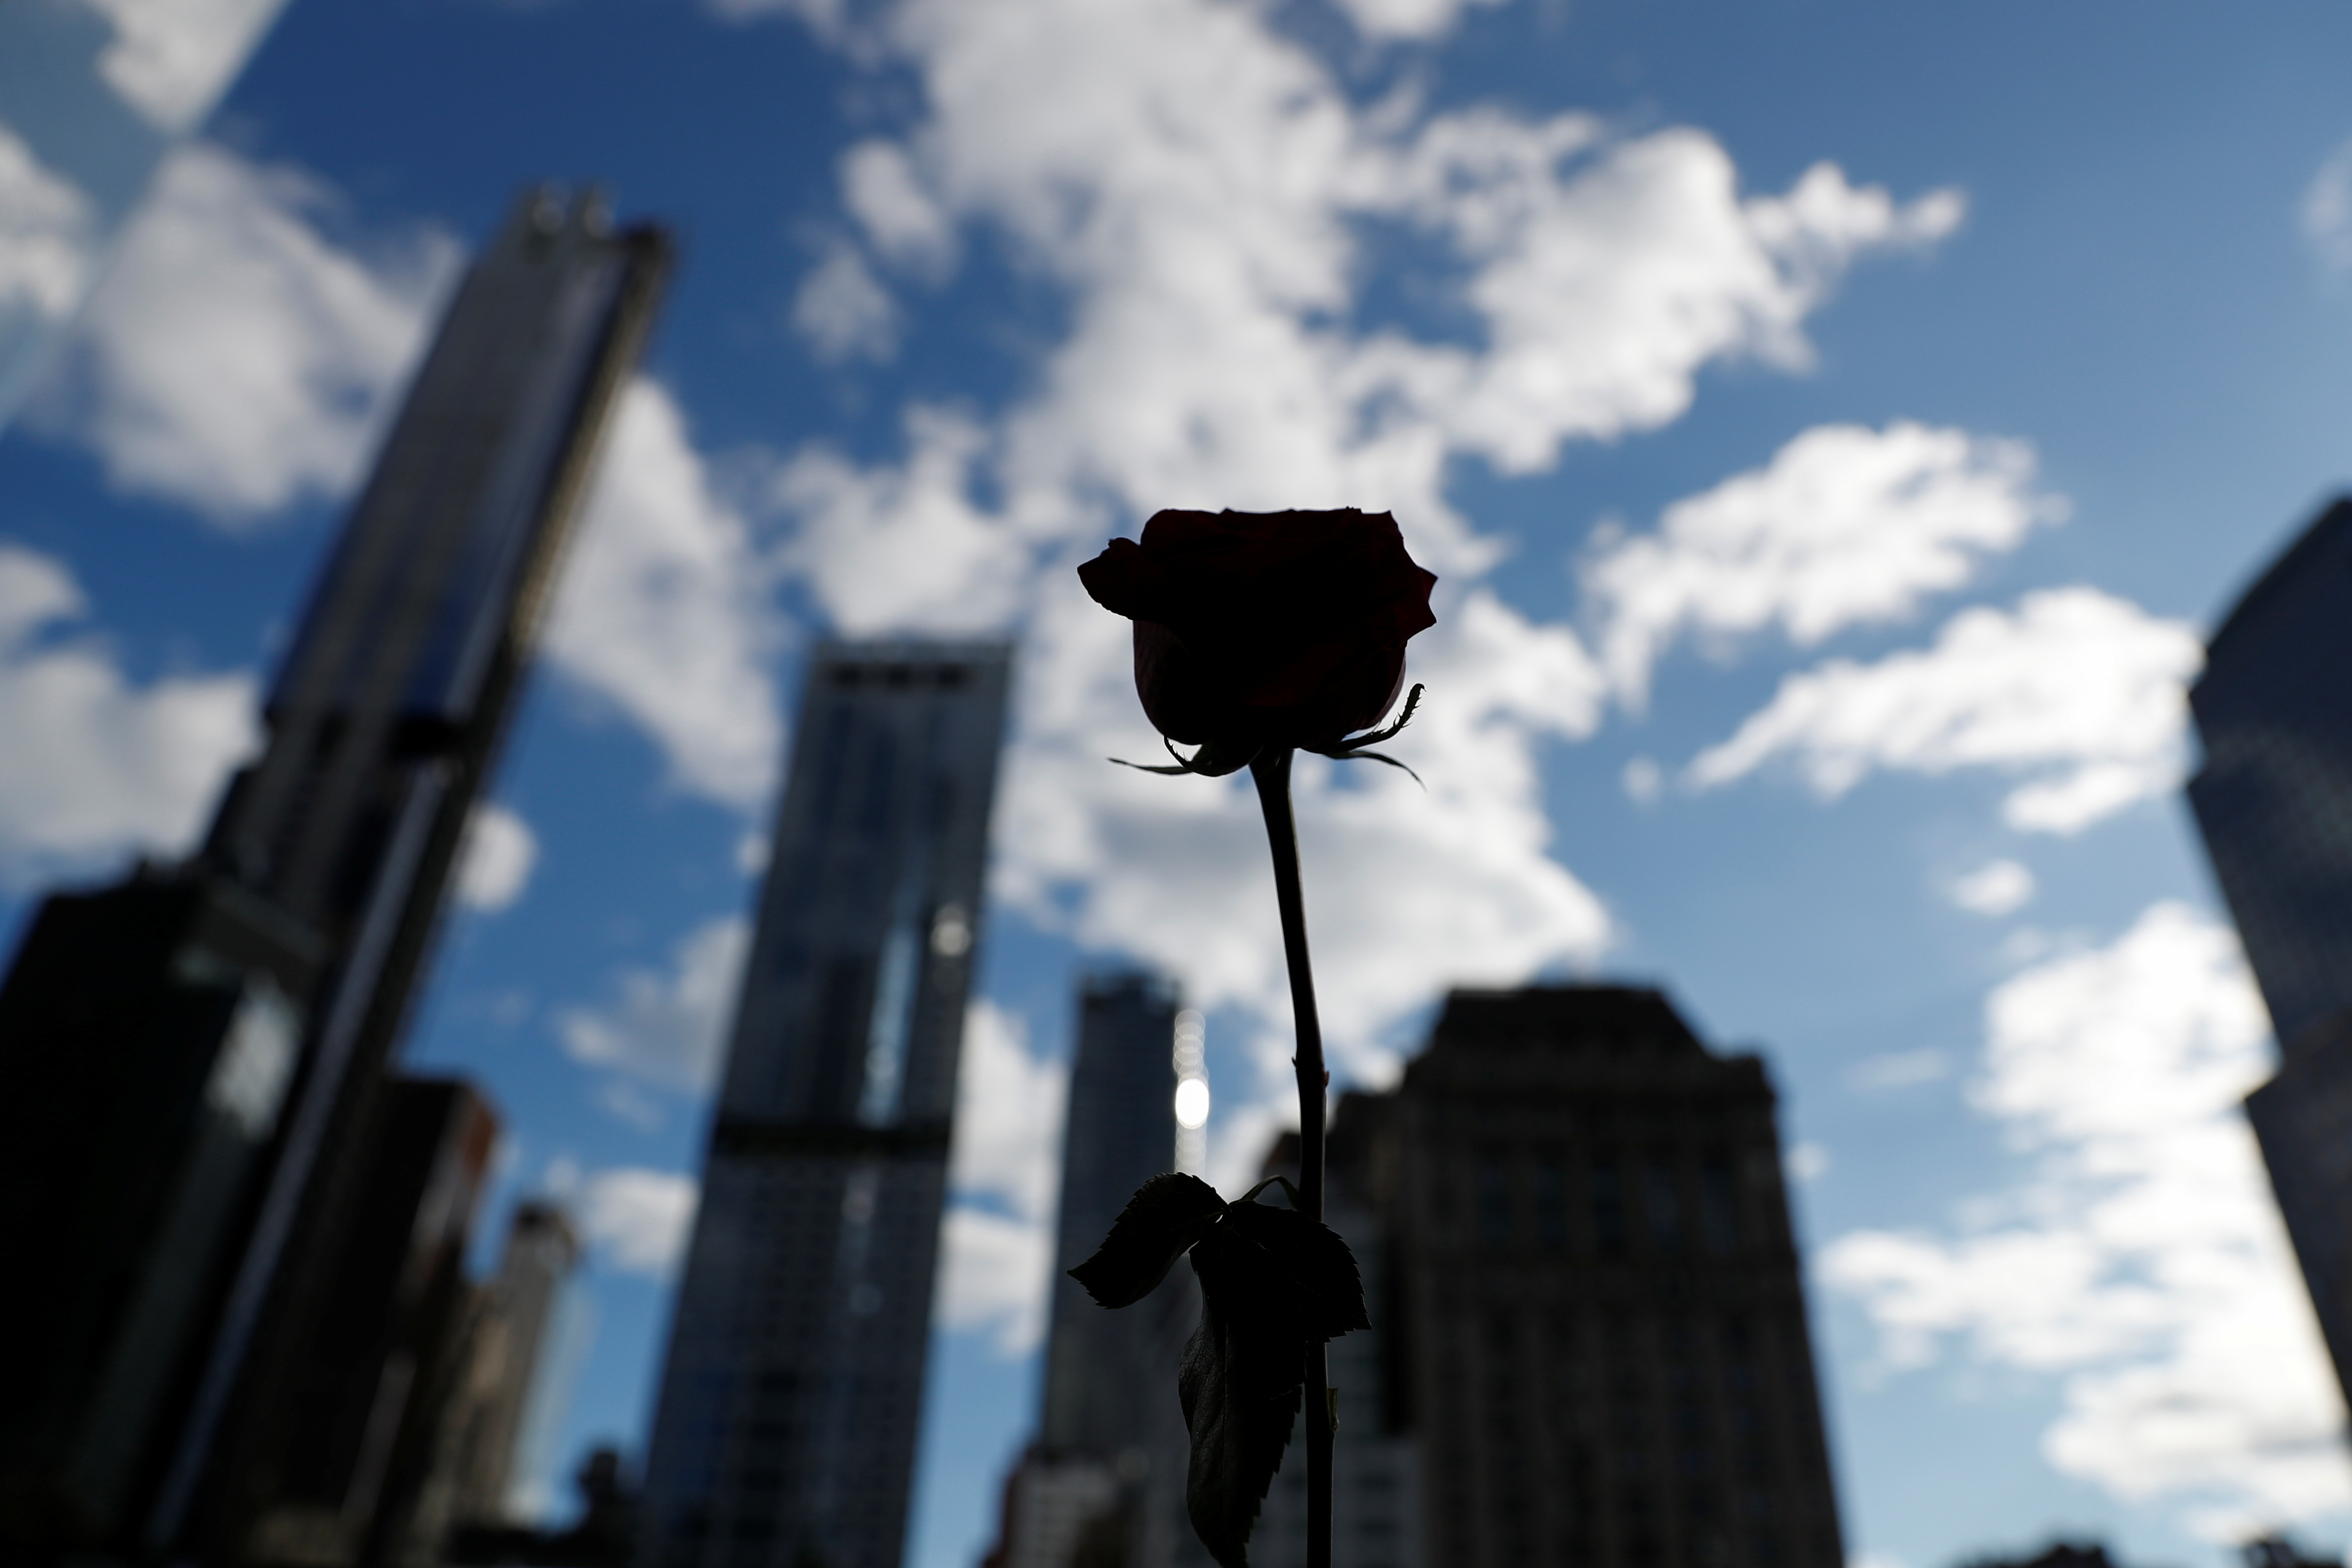 A flower seen in silhouette stands on the south reflecting pool at the 9/11 Memorial site in the lower section of Manhattan, New York City, U.S., September 2, 2021.  REUTERS/Shannon Stapleton